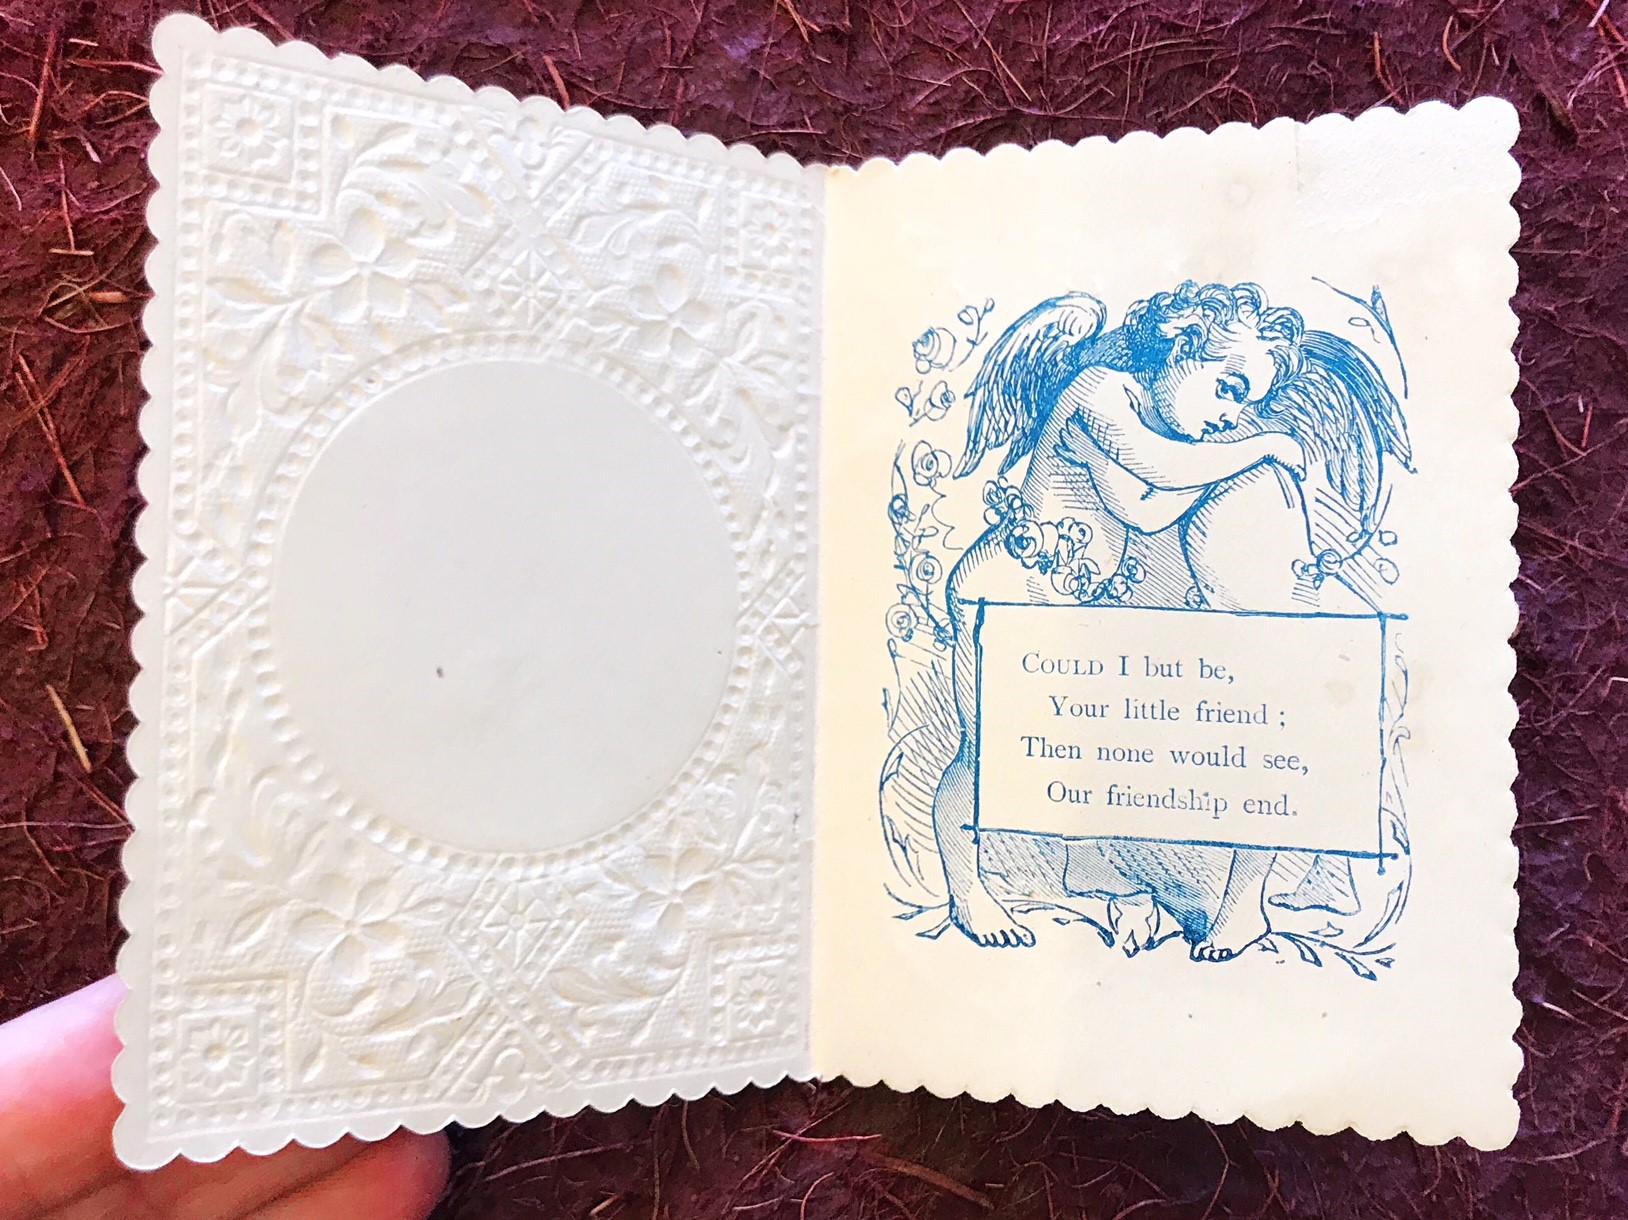 paper lace valentines with drawing of cupids and a poem